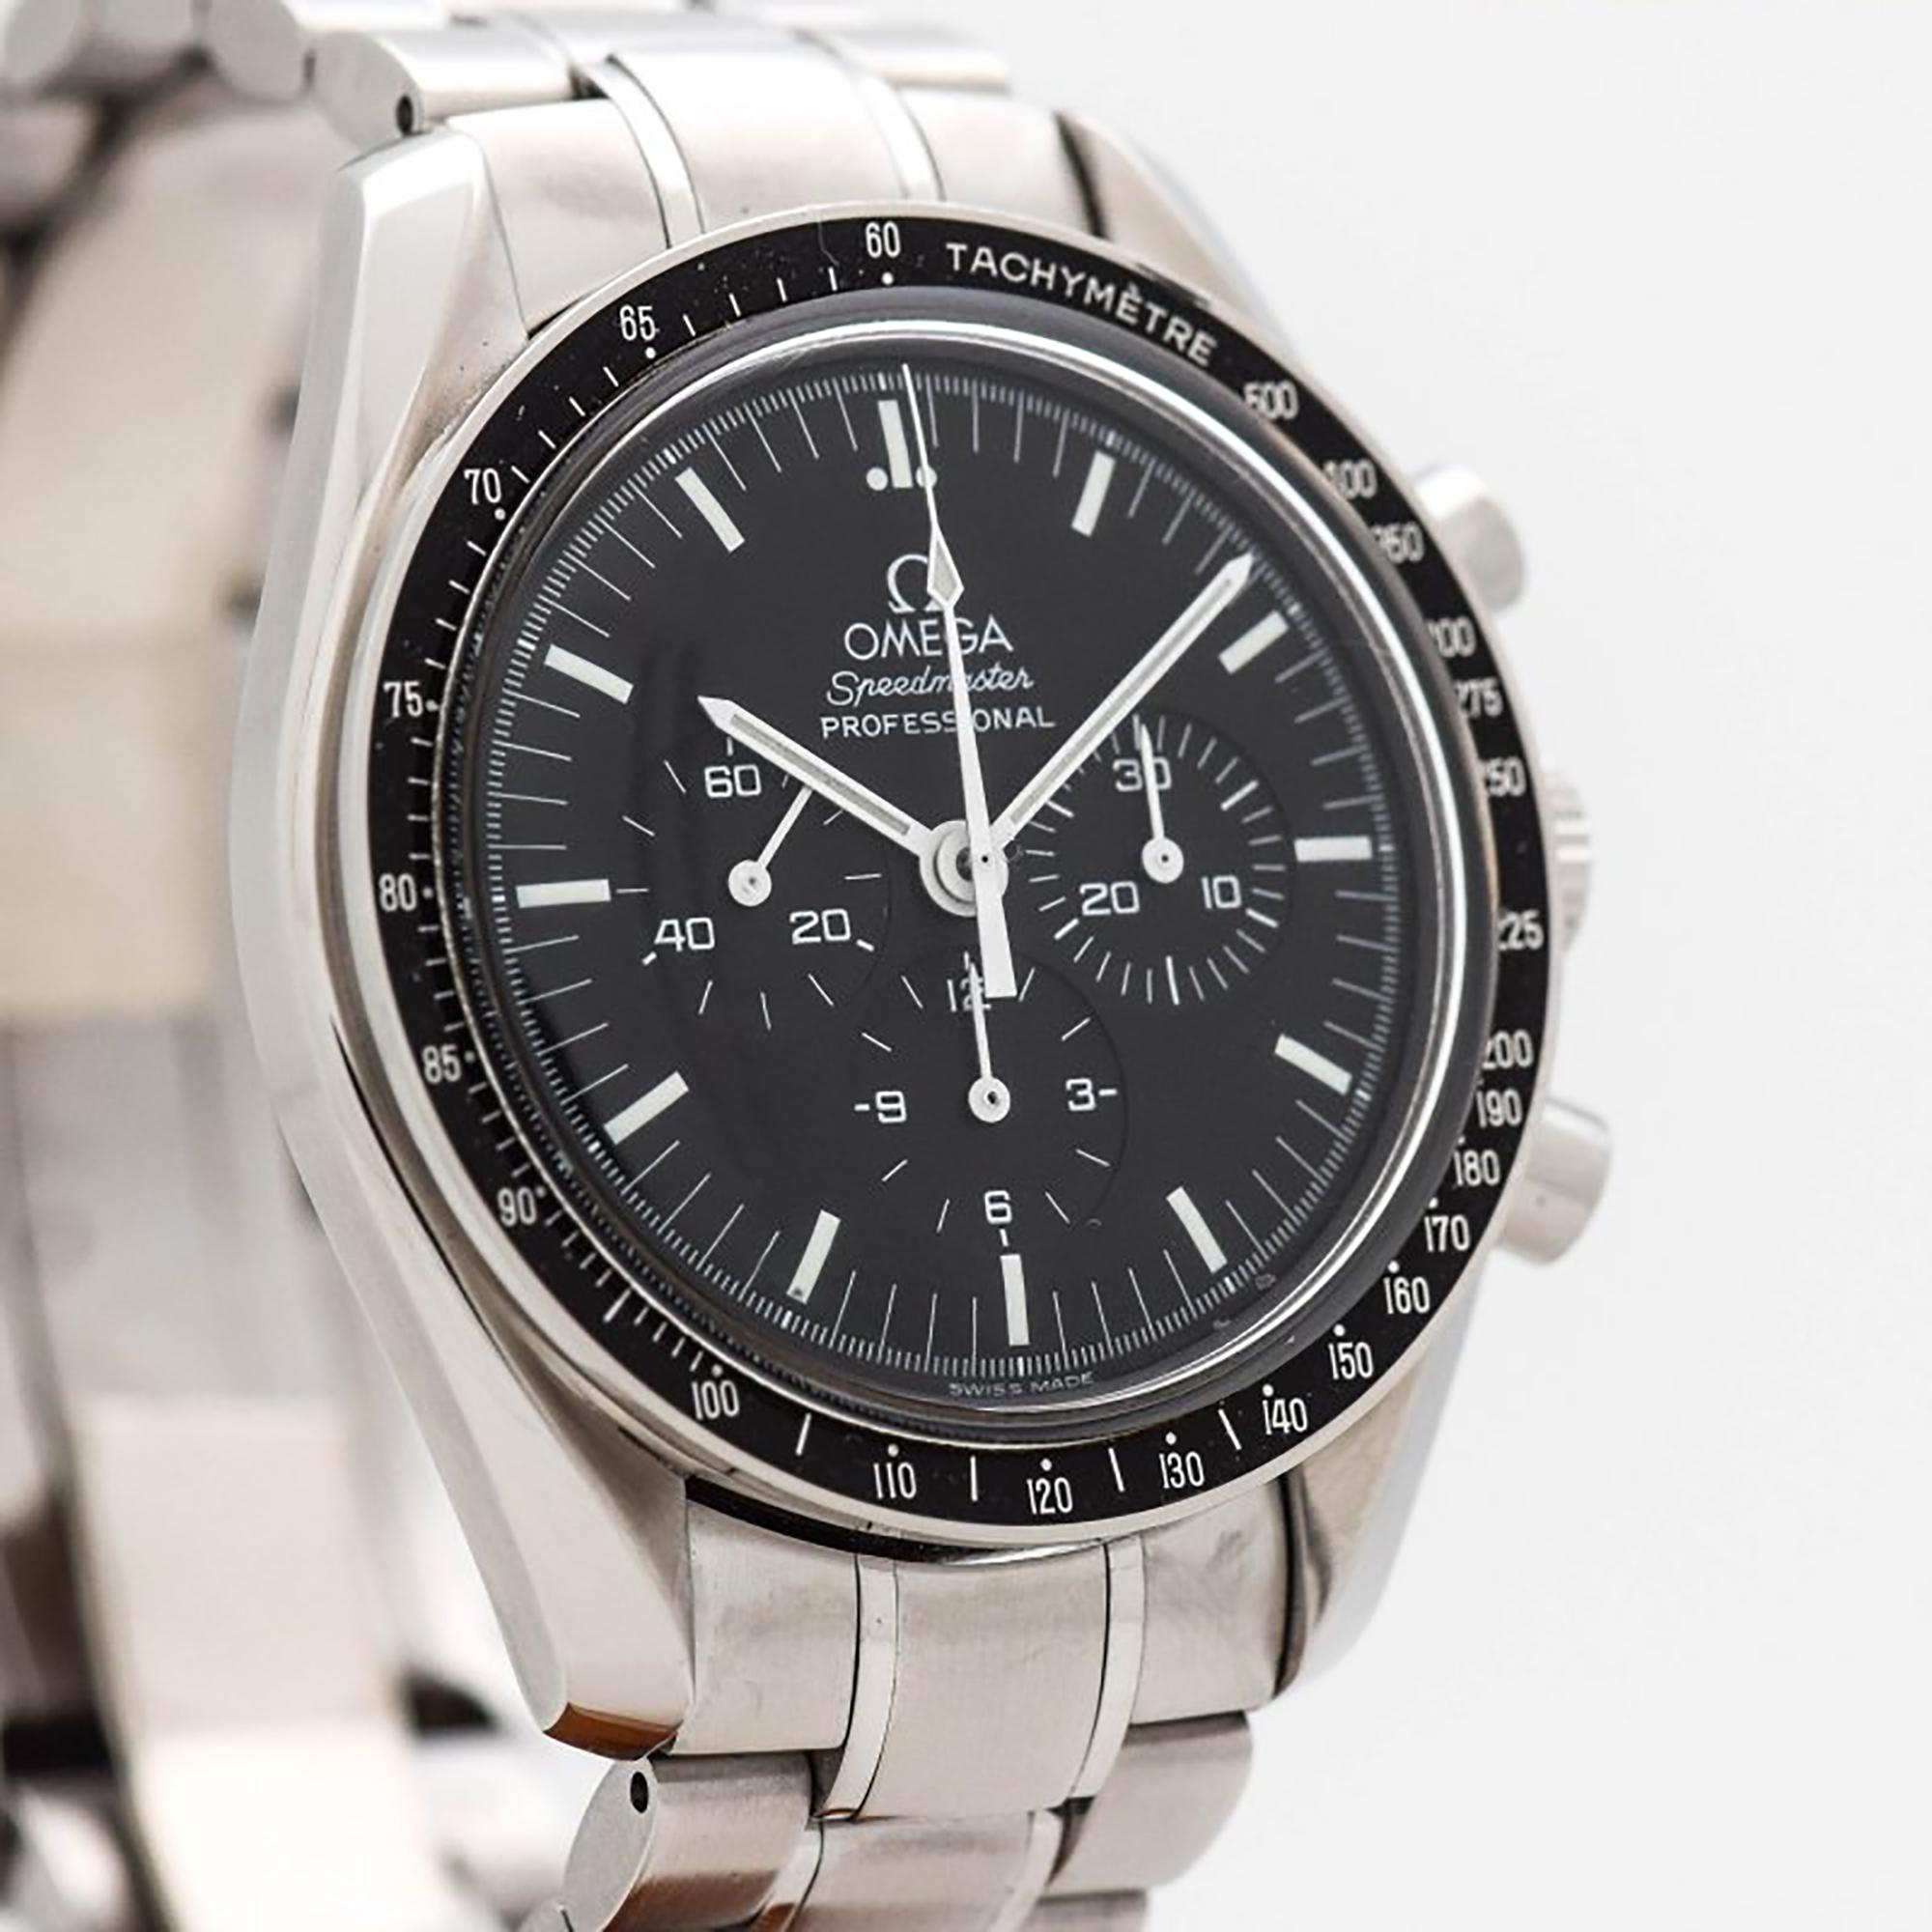 2000 Omega Speedmaster Professional Moon Ref. 1450022 / 3450022 Stainless Steel watch with Original Black Dial with Luminous Markers with Original Omega Stainless Steel Bracelet. 42mm x 48mm lug to lug (1.65 in. x 1.89 in.) - Powered by an 18-jewel,